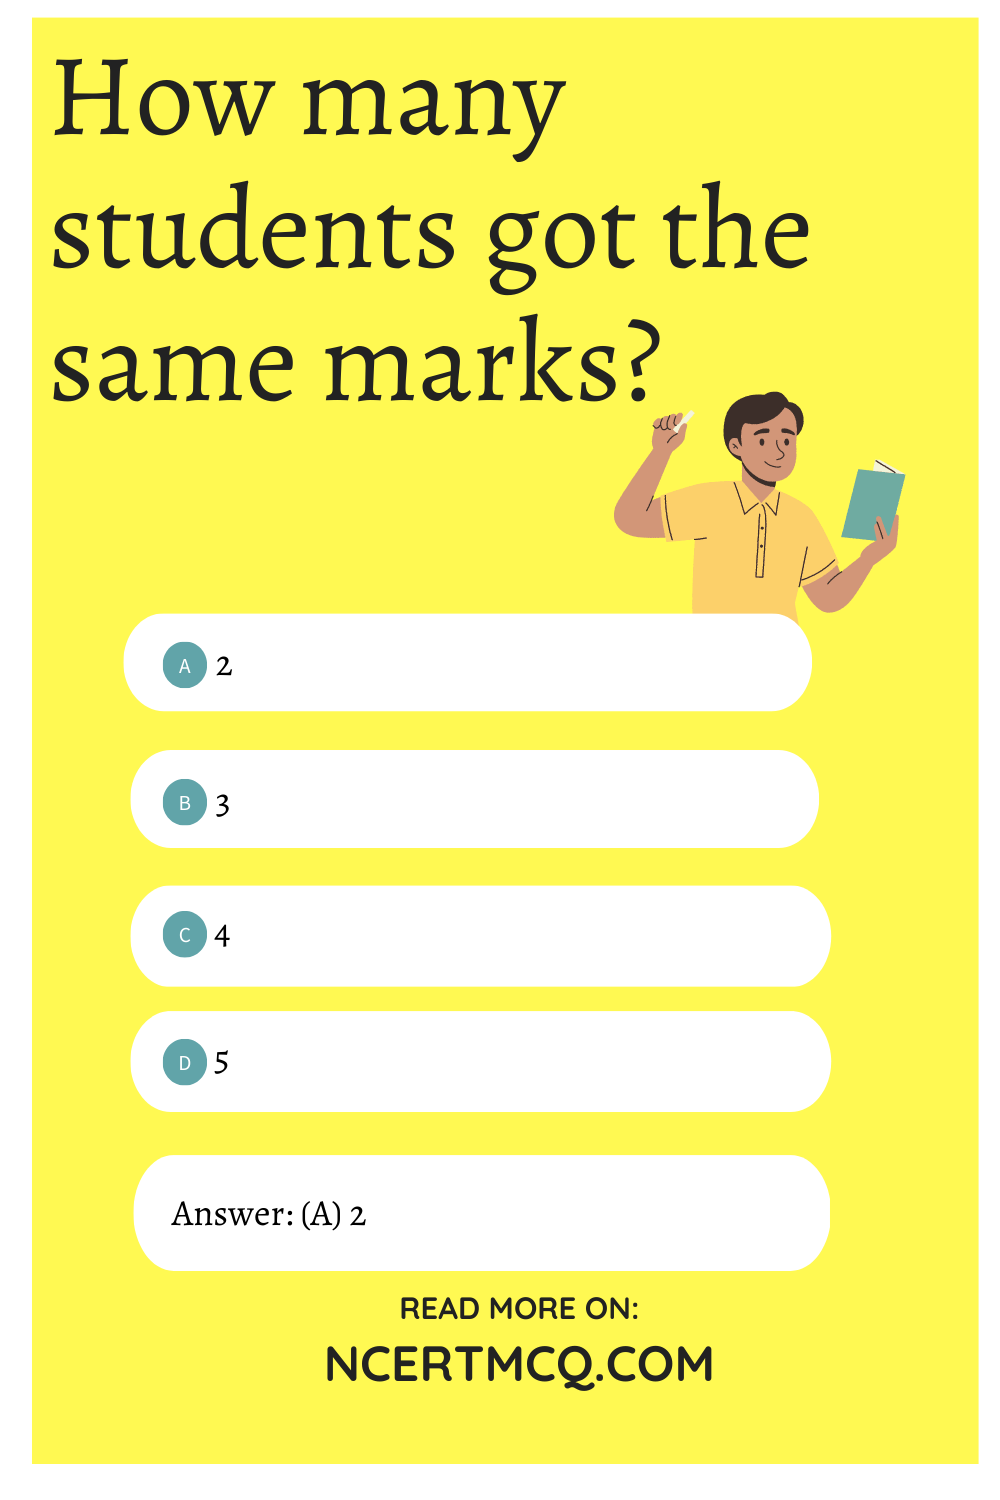 How many students got the same marks?